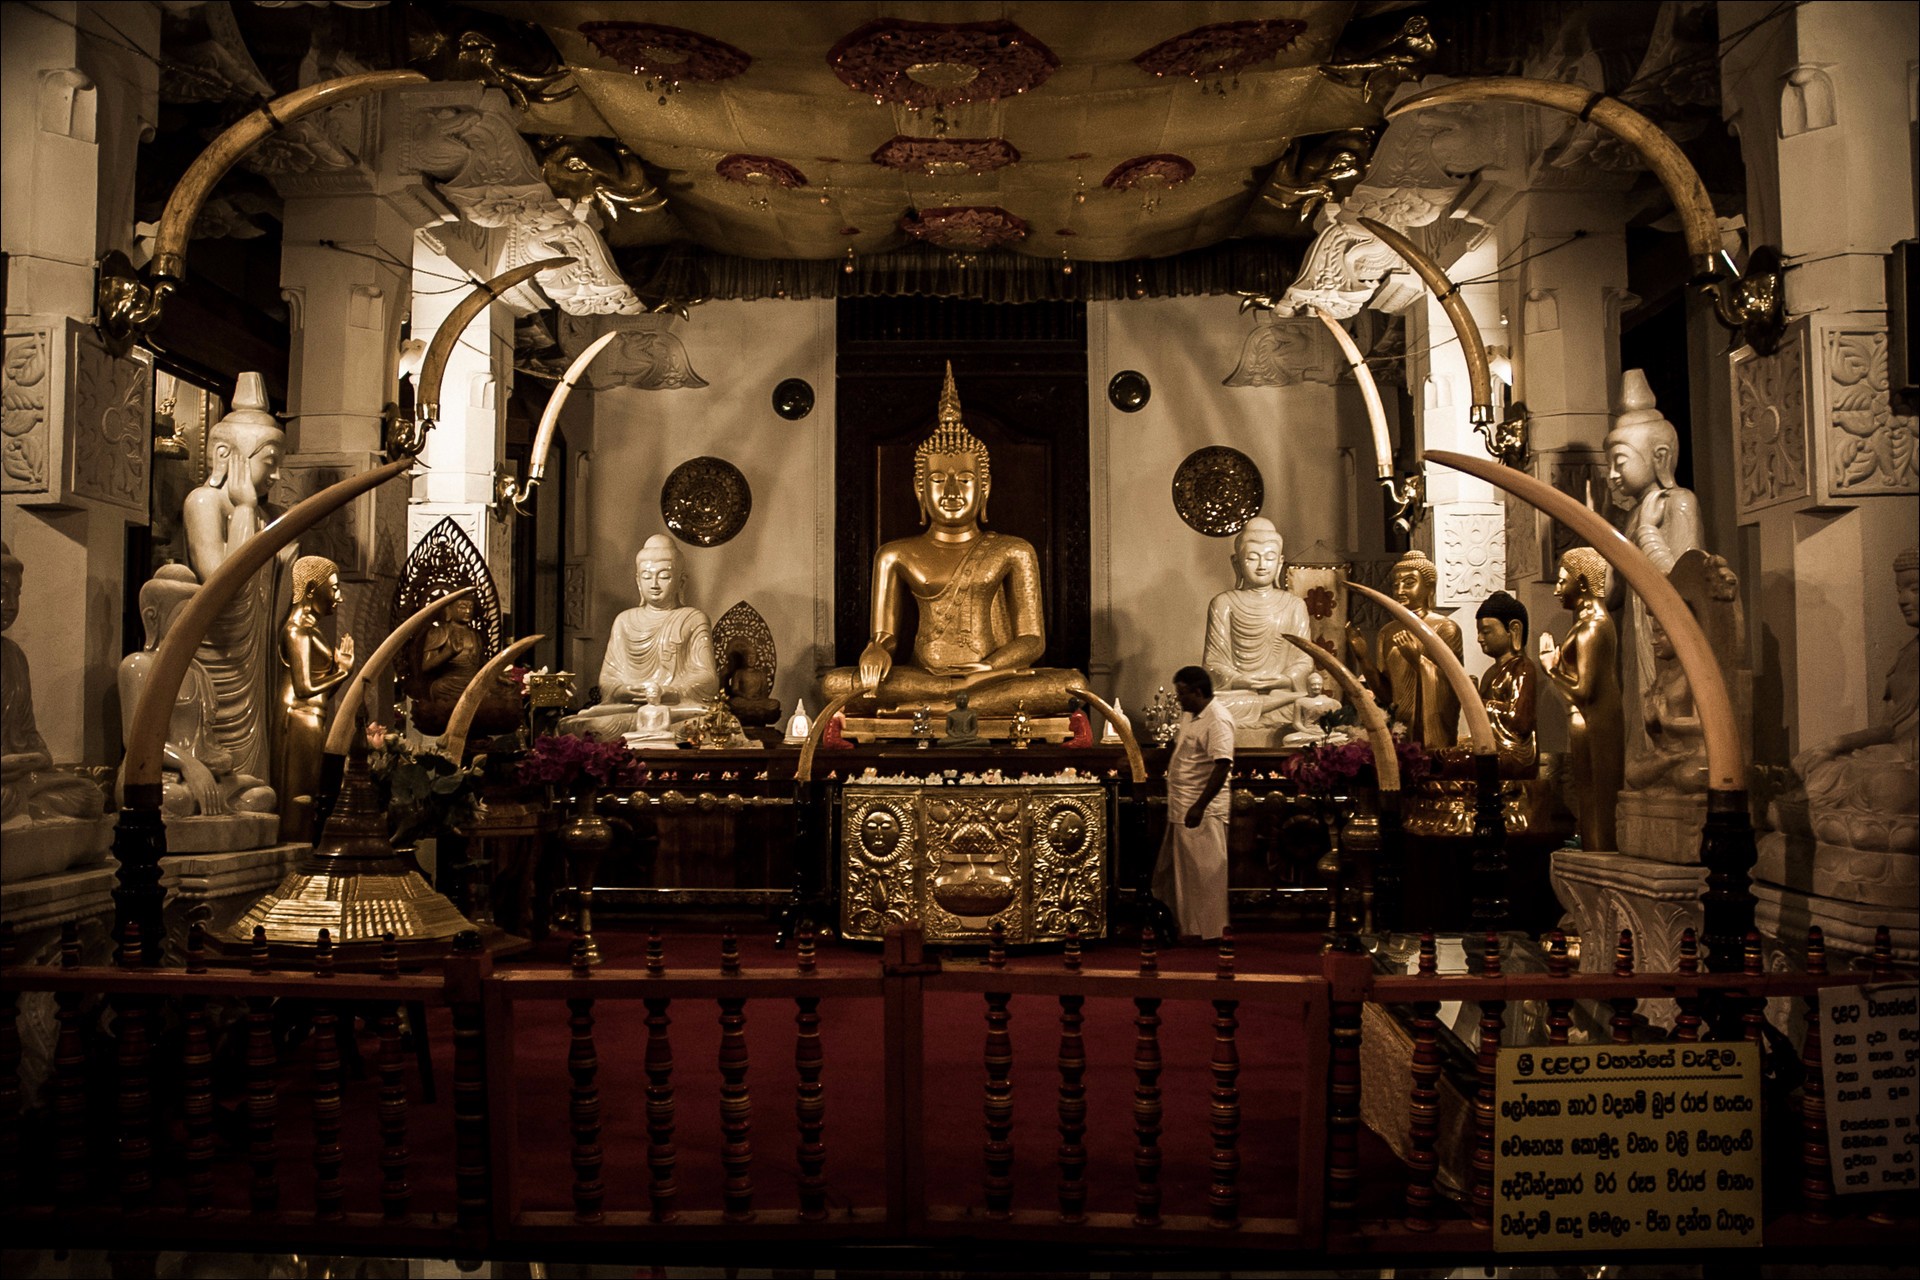 Relic of the tooth of the Buddha, Sri Lanka